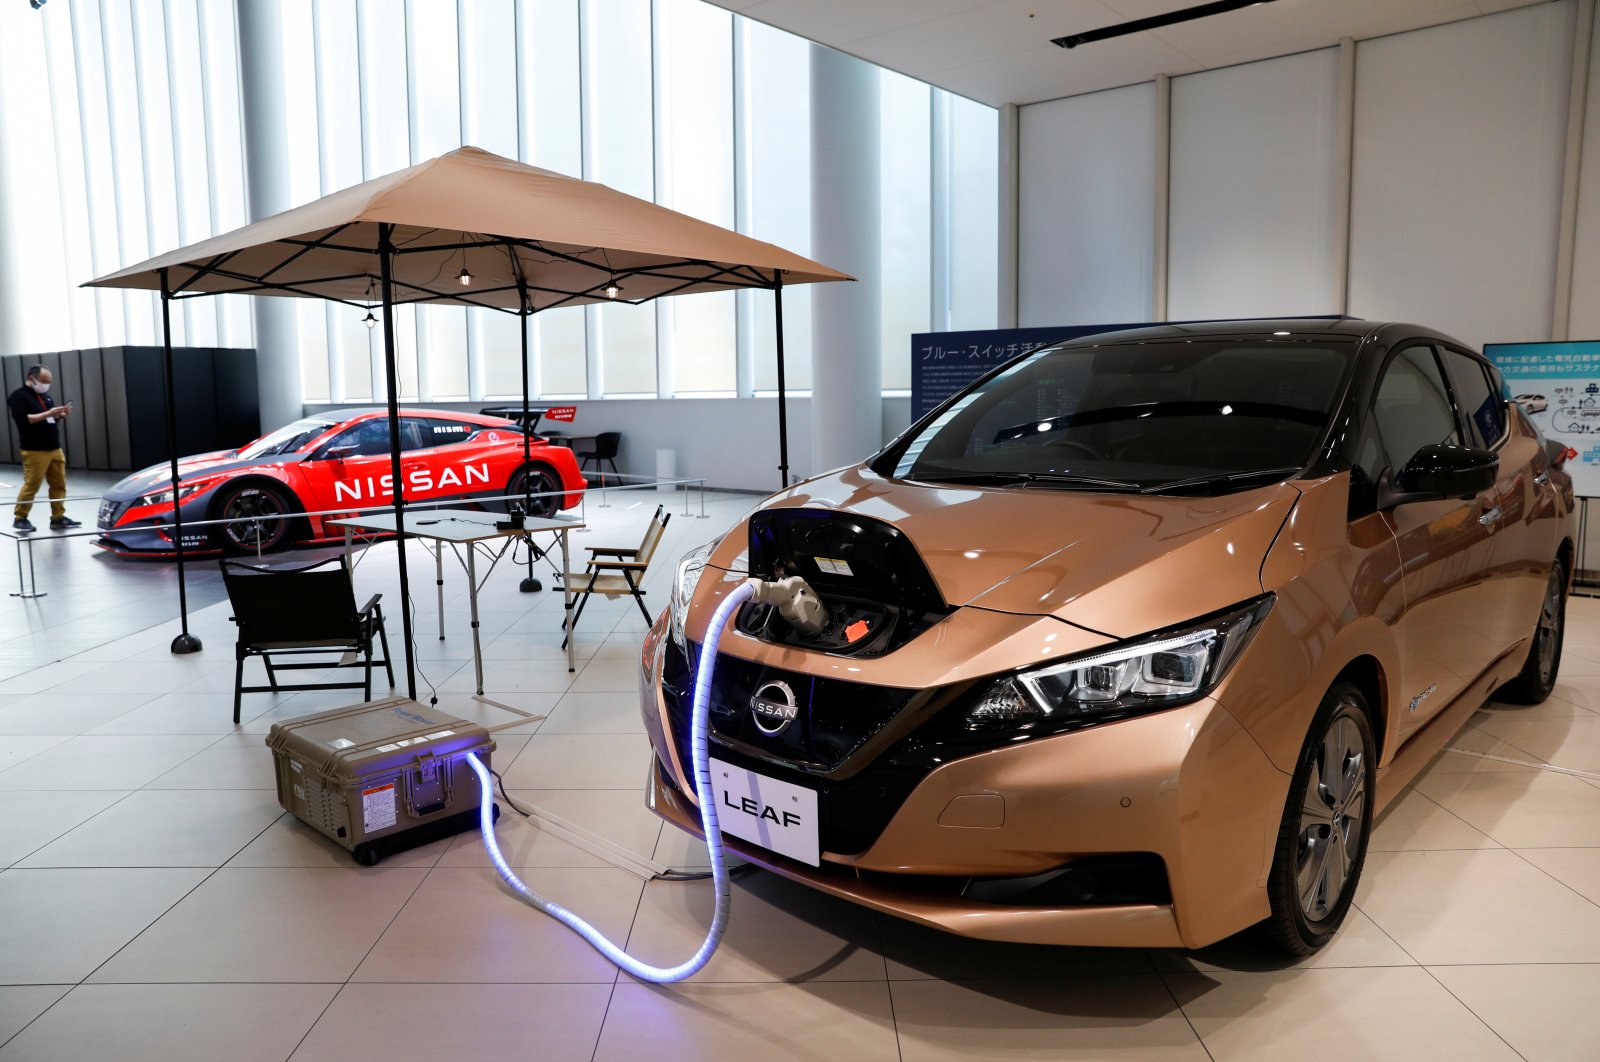 A Nissan Leaf EV car and portable battery on display at Nissan Gallery in Yokohama, Japan, Nov. 29, 2021. (Reuters Photo)